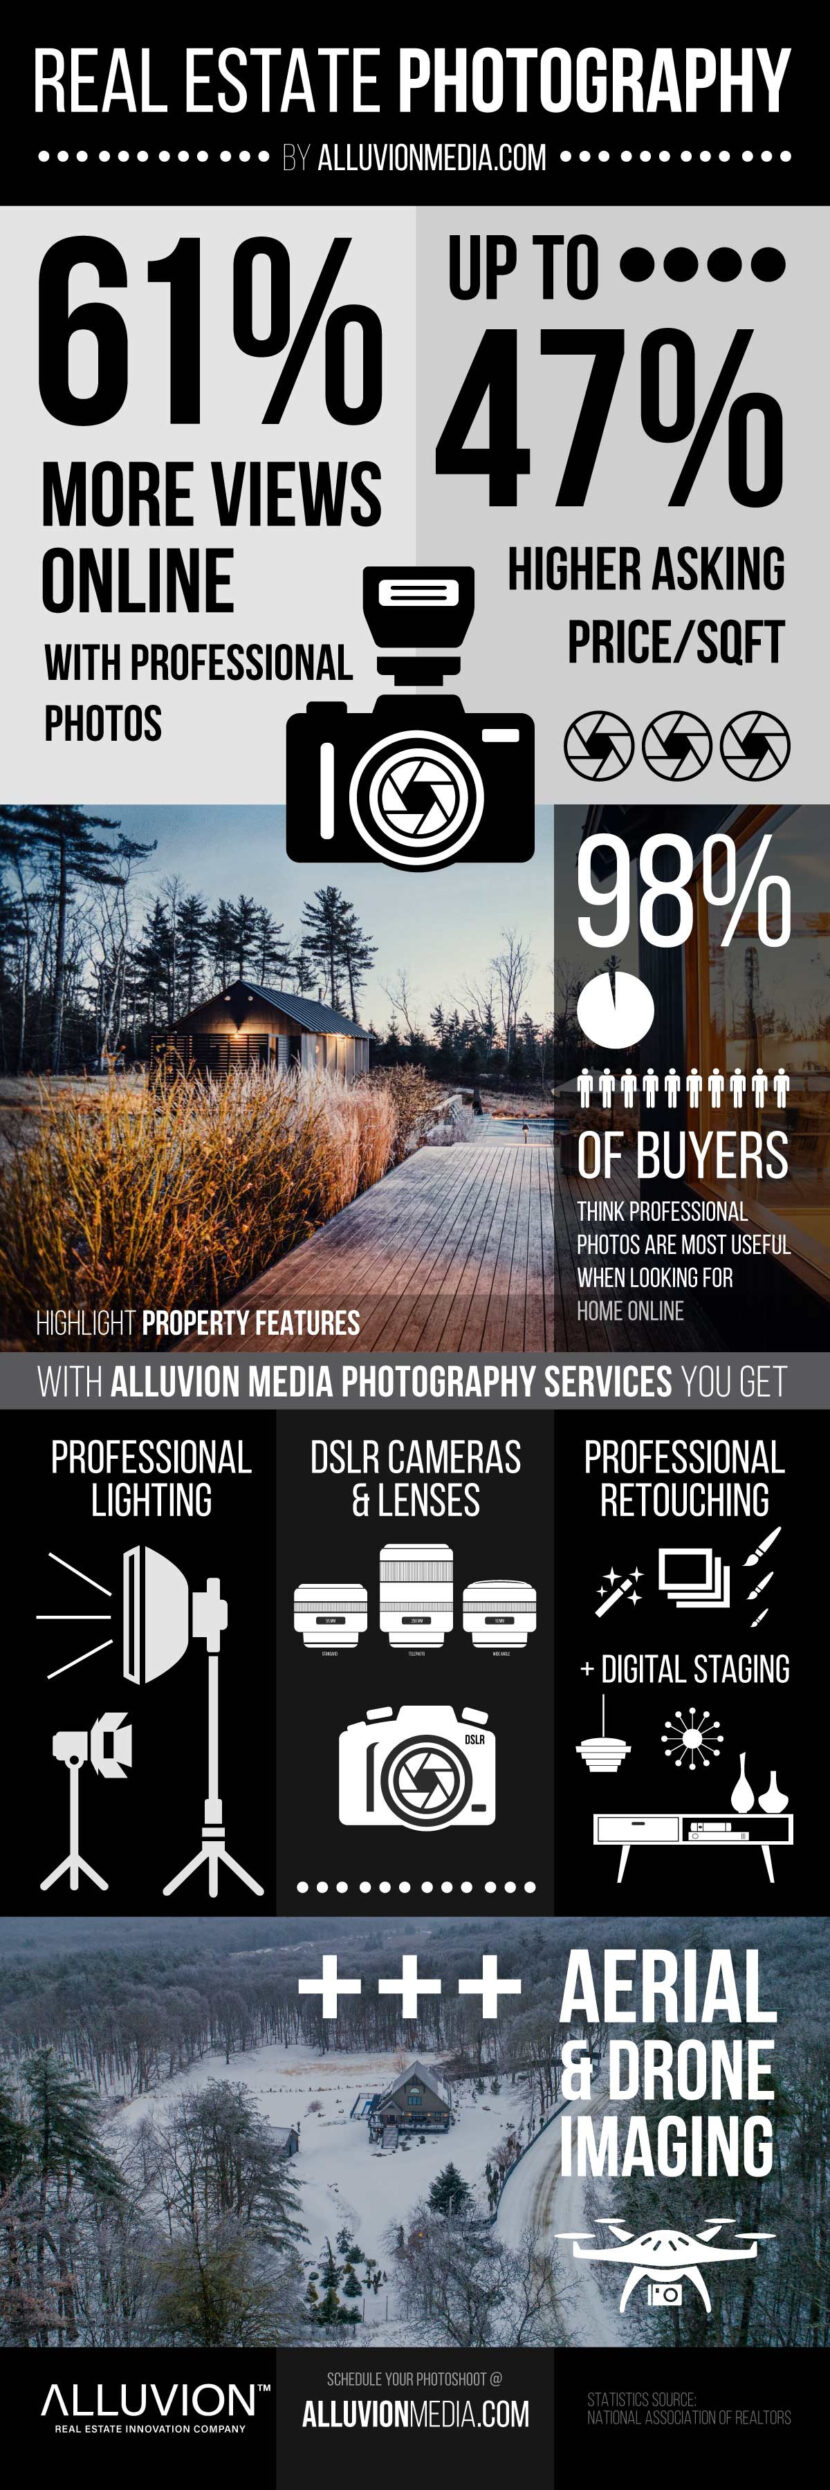 Infographic – Hudson Valley and Catskills Real Estate + Airbnb Photography by ALLUVION INC.